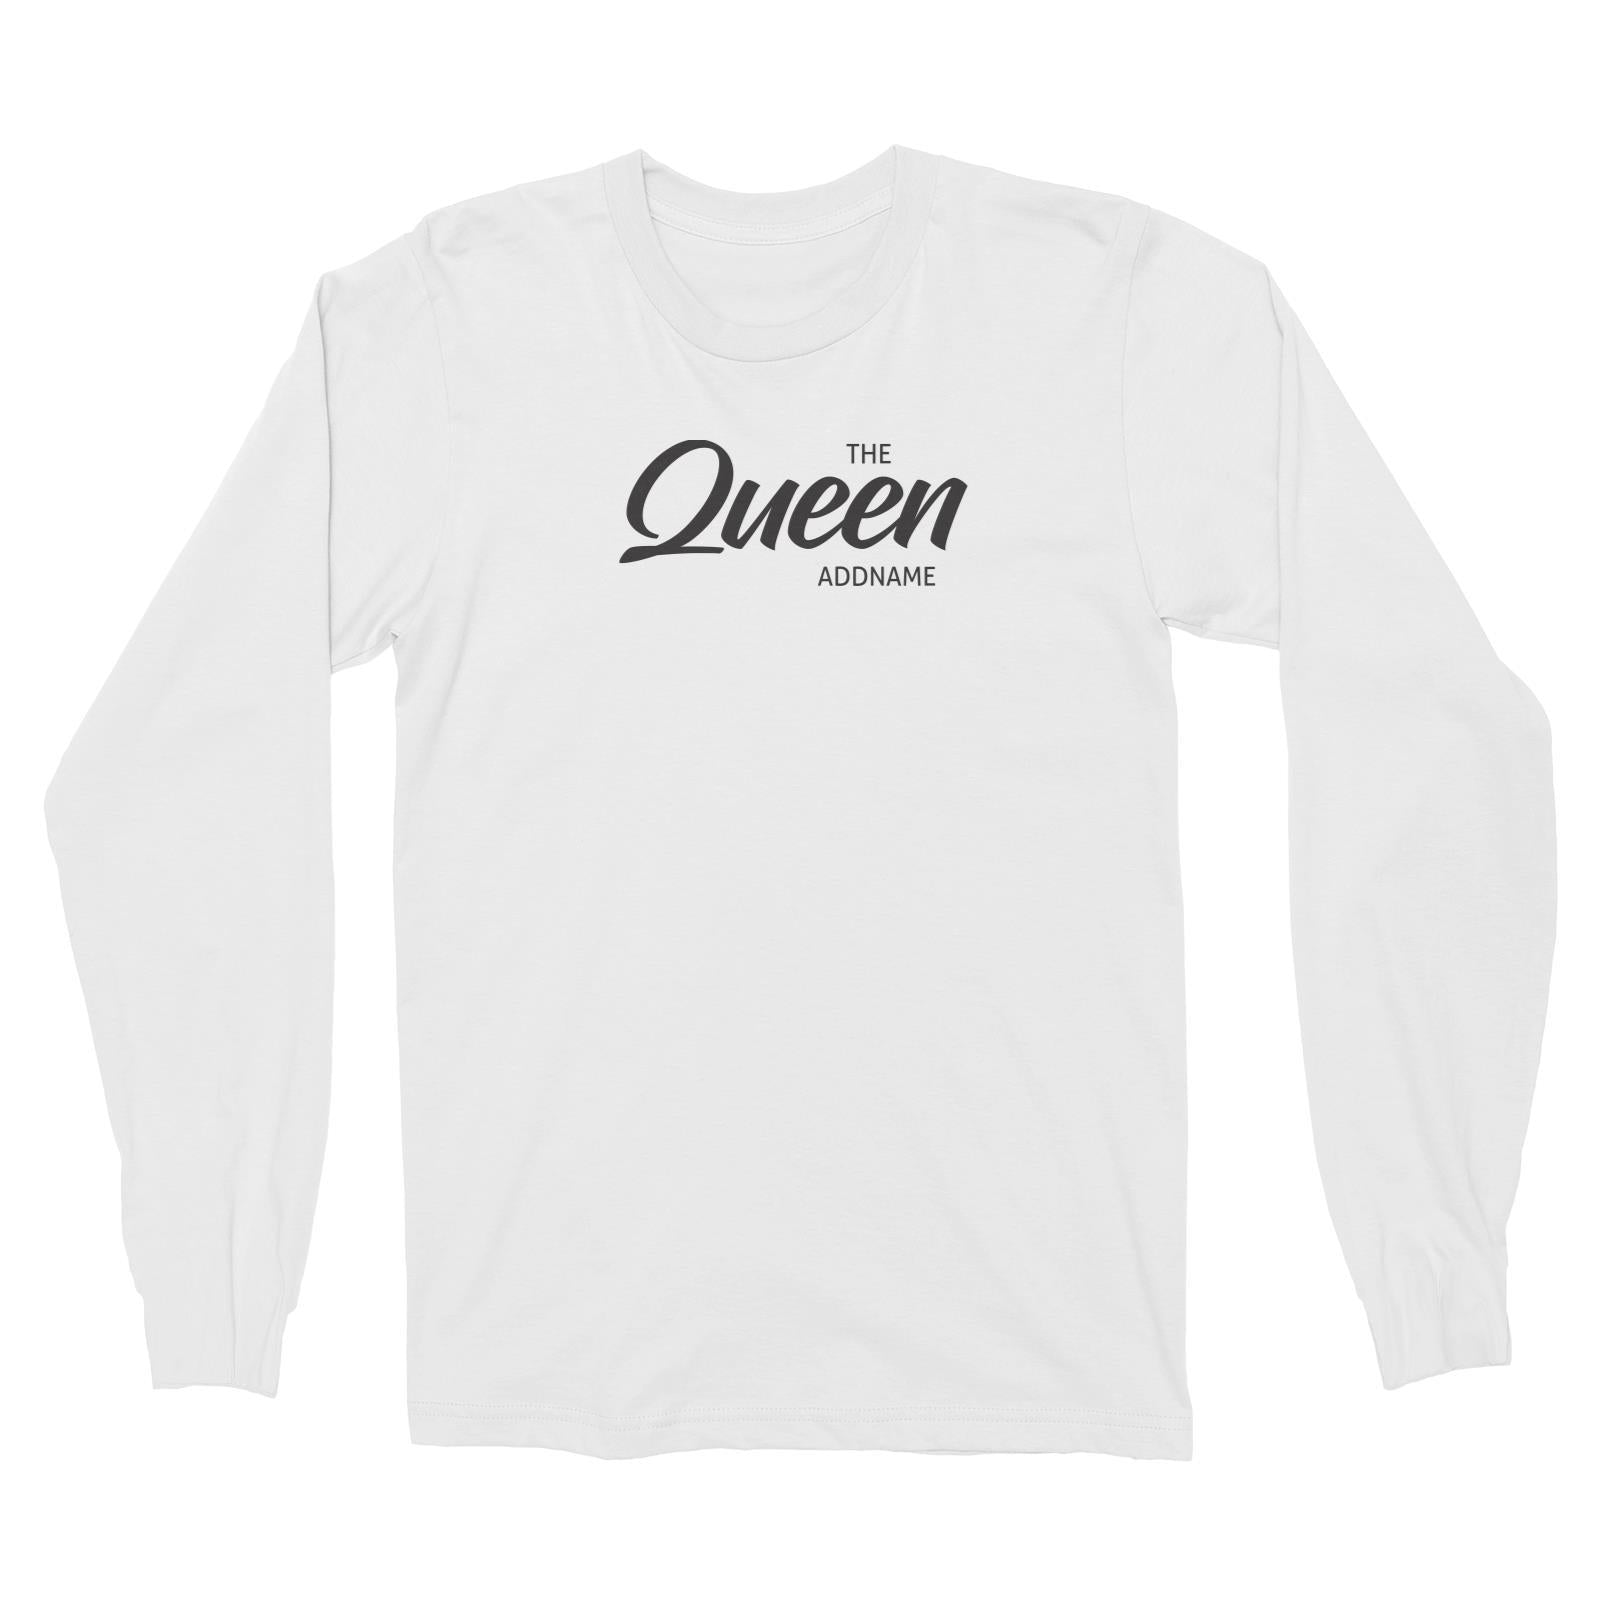 The Queen Addname Long Sleeve Unisex T-Shirt Personalizable Designs Matching Family Royal Family Edition Royal Simple